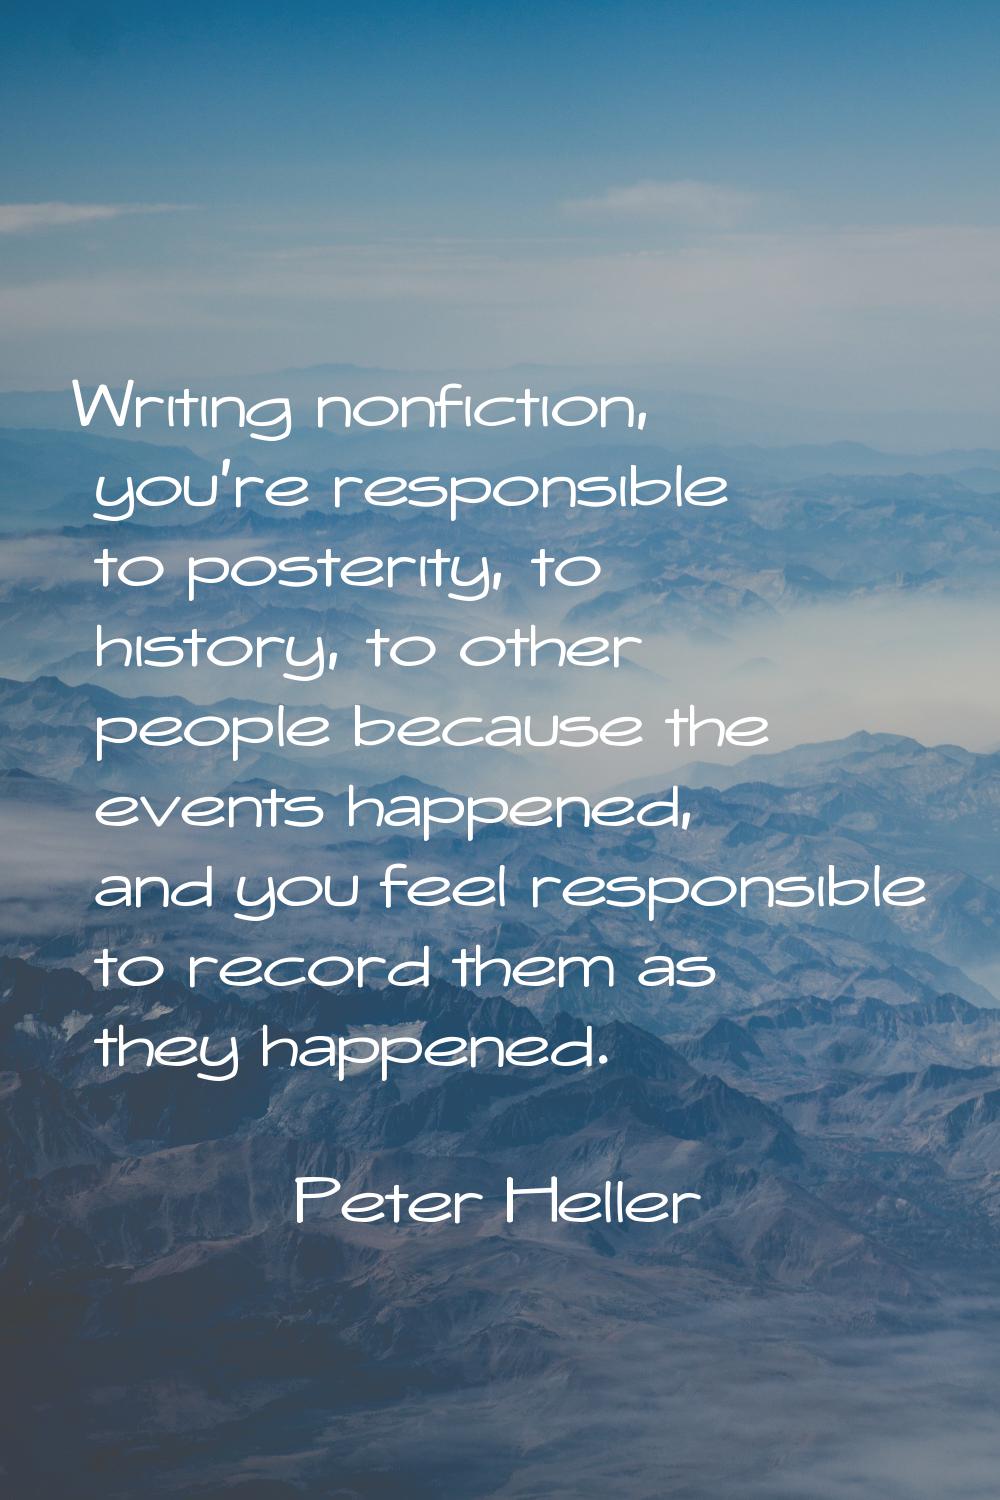 Writing nonfiction, you're responsible to posterity, to history, to other people because the events